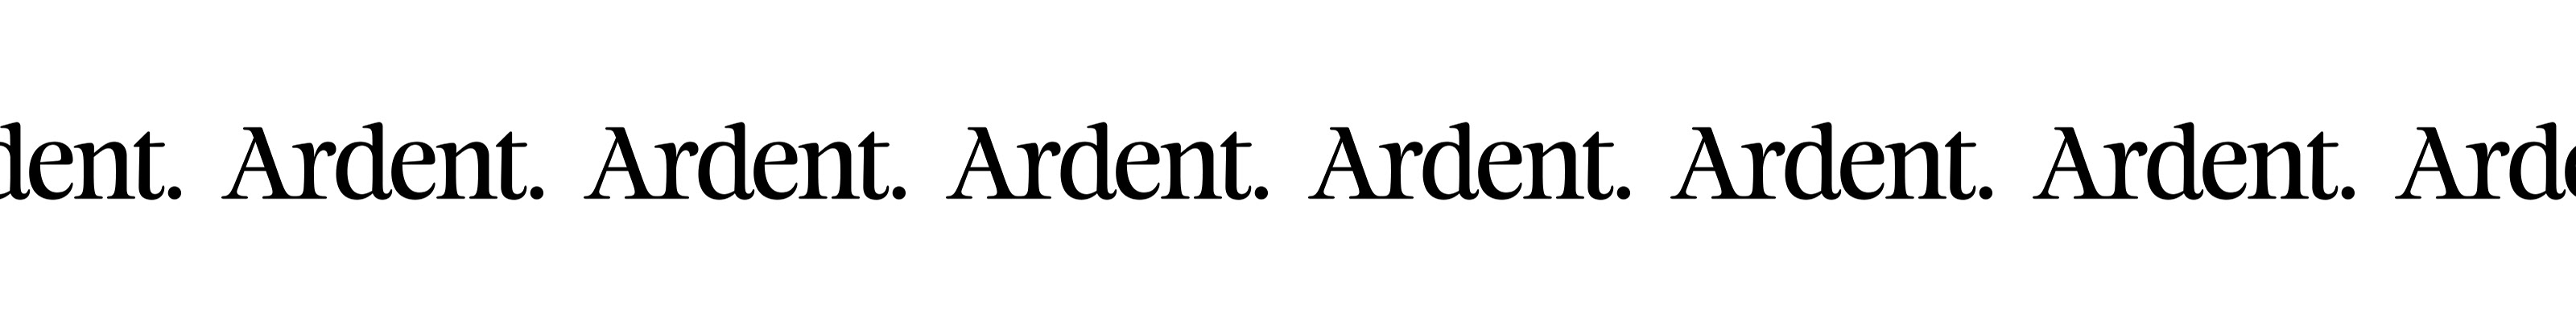 Ardent .'s profile banner